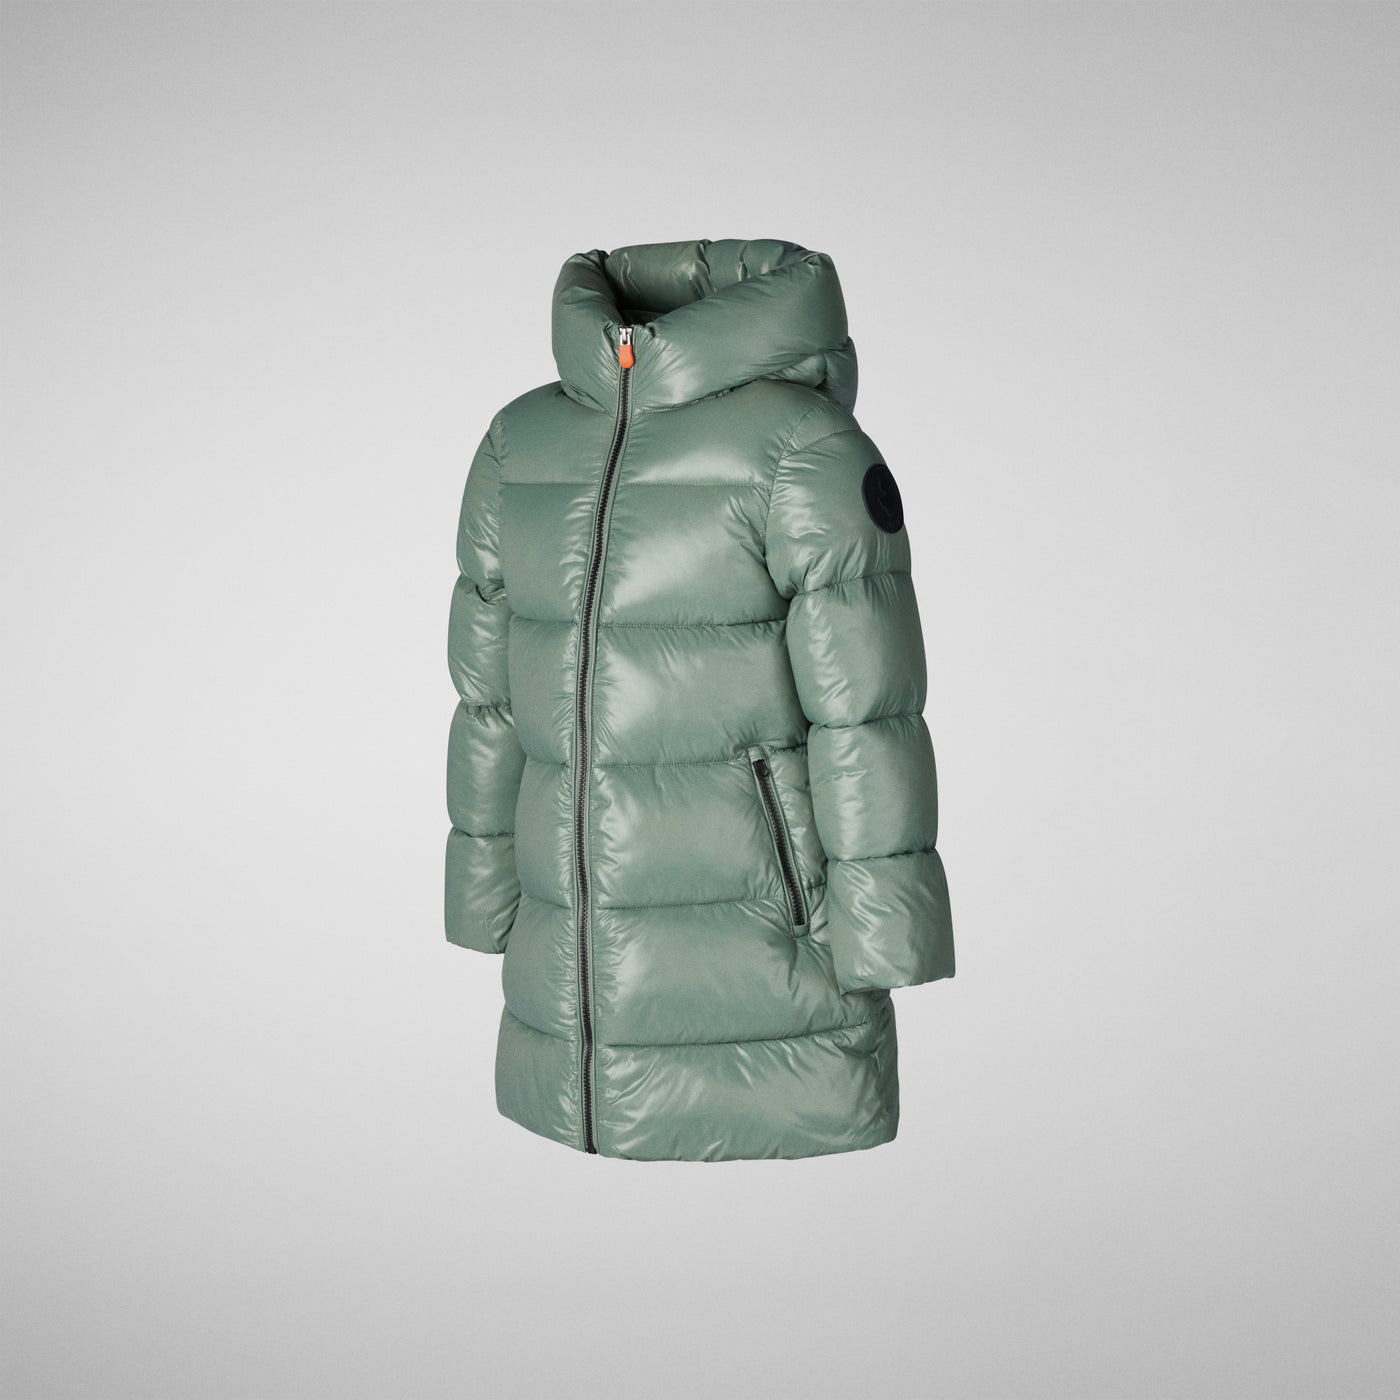 Side Product View of Girls' Millie Hooded Puffer Coat in Seaweed Green